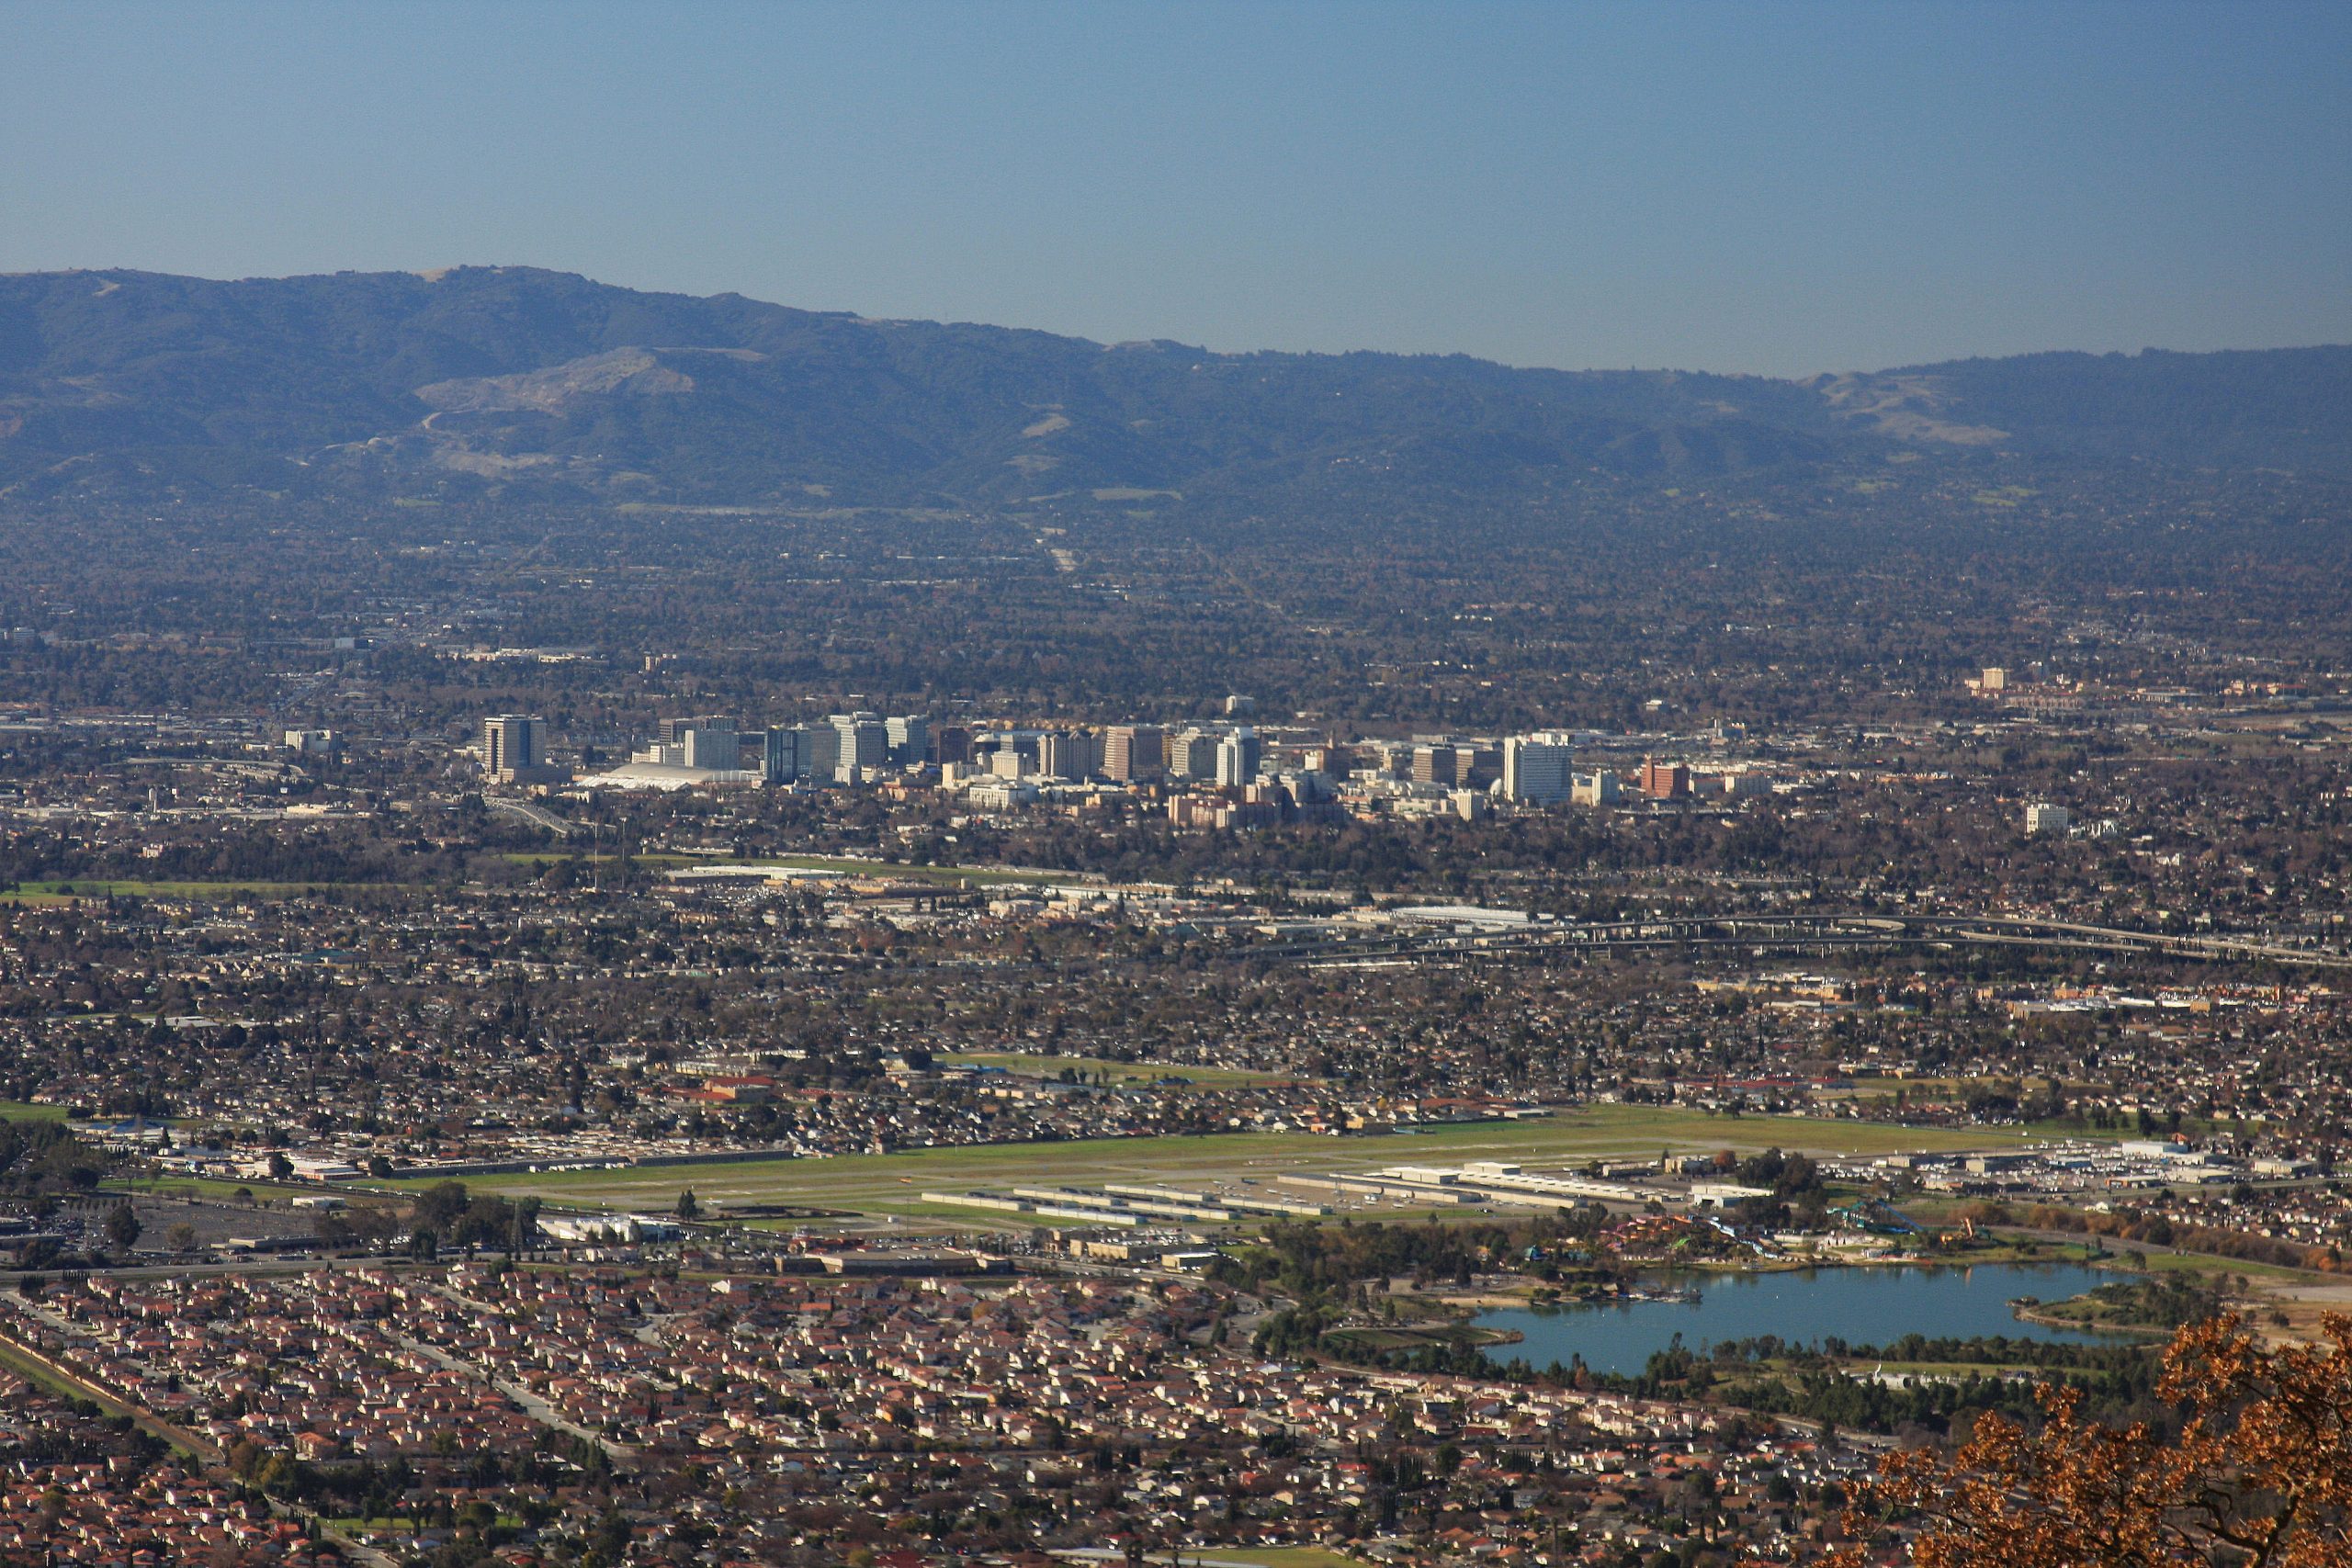 Methane emissions reduction critical to curbing world warming; San Jose children near the airport face lead poisoning